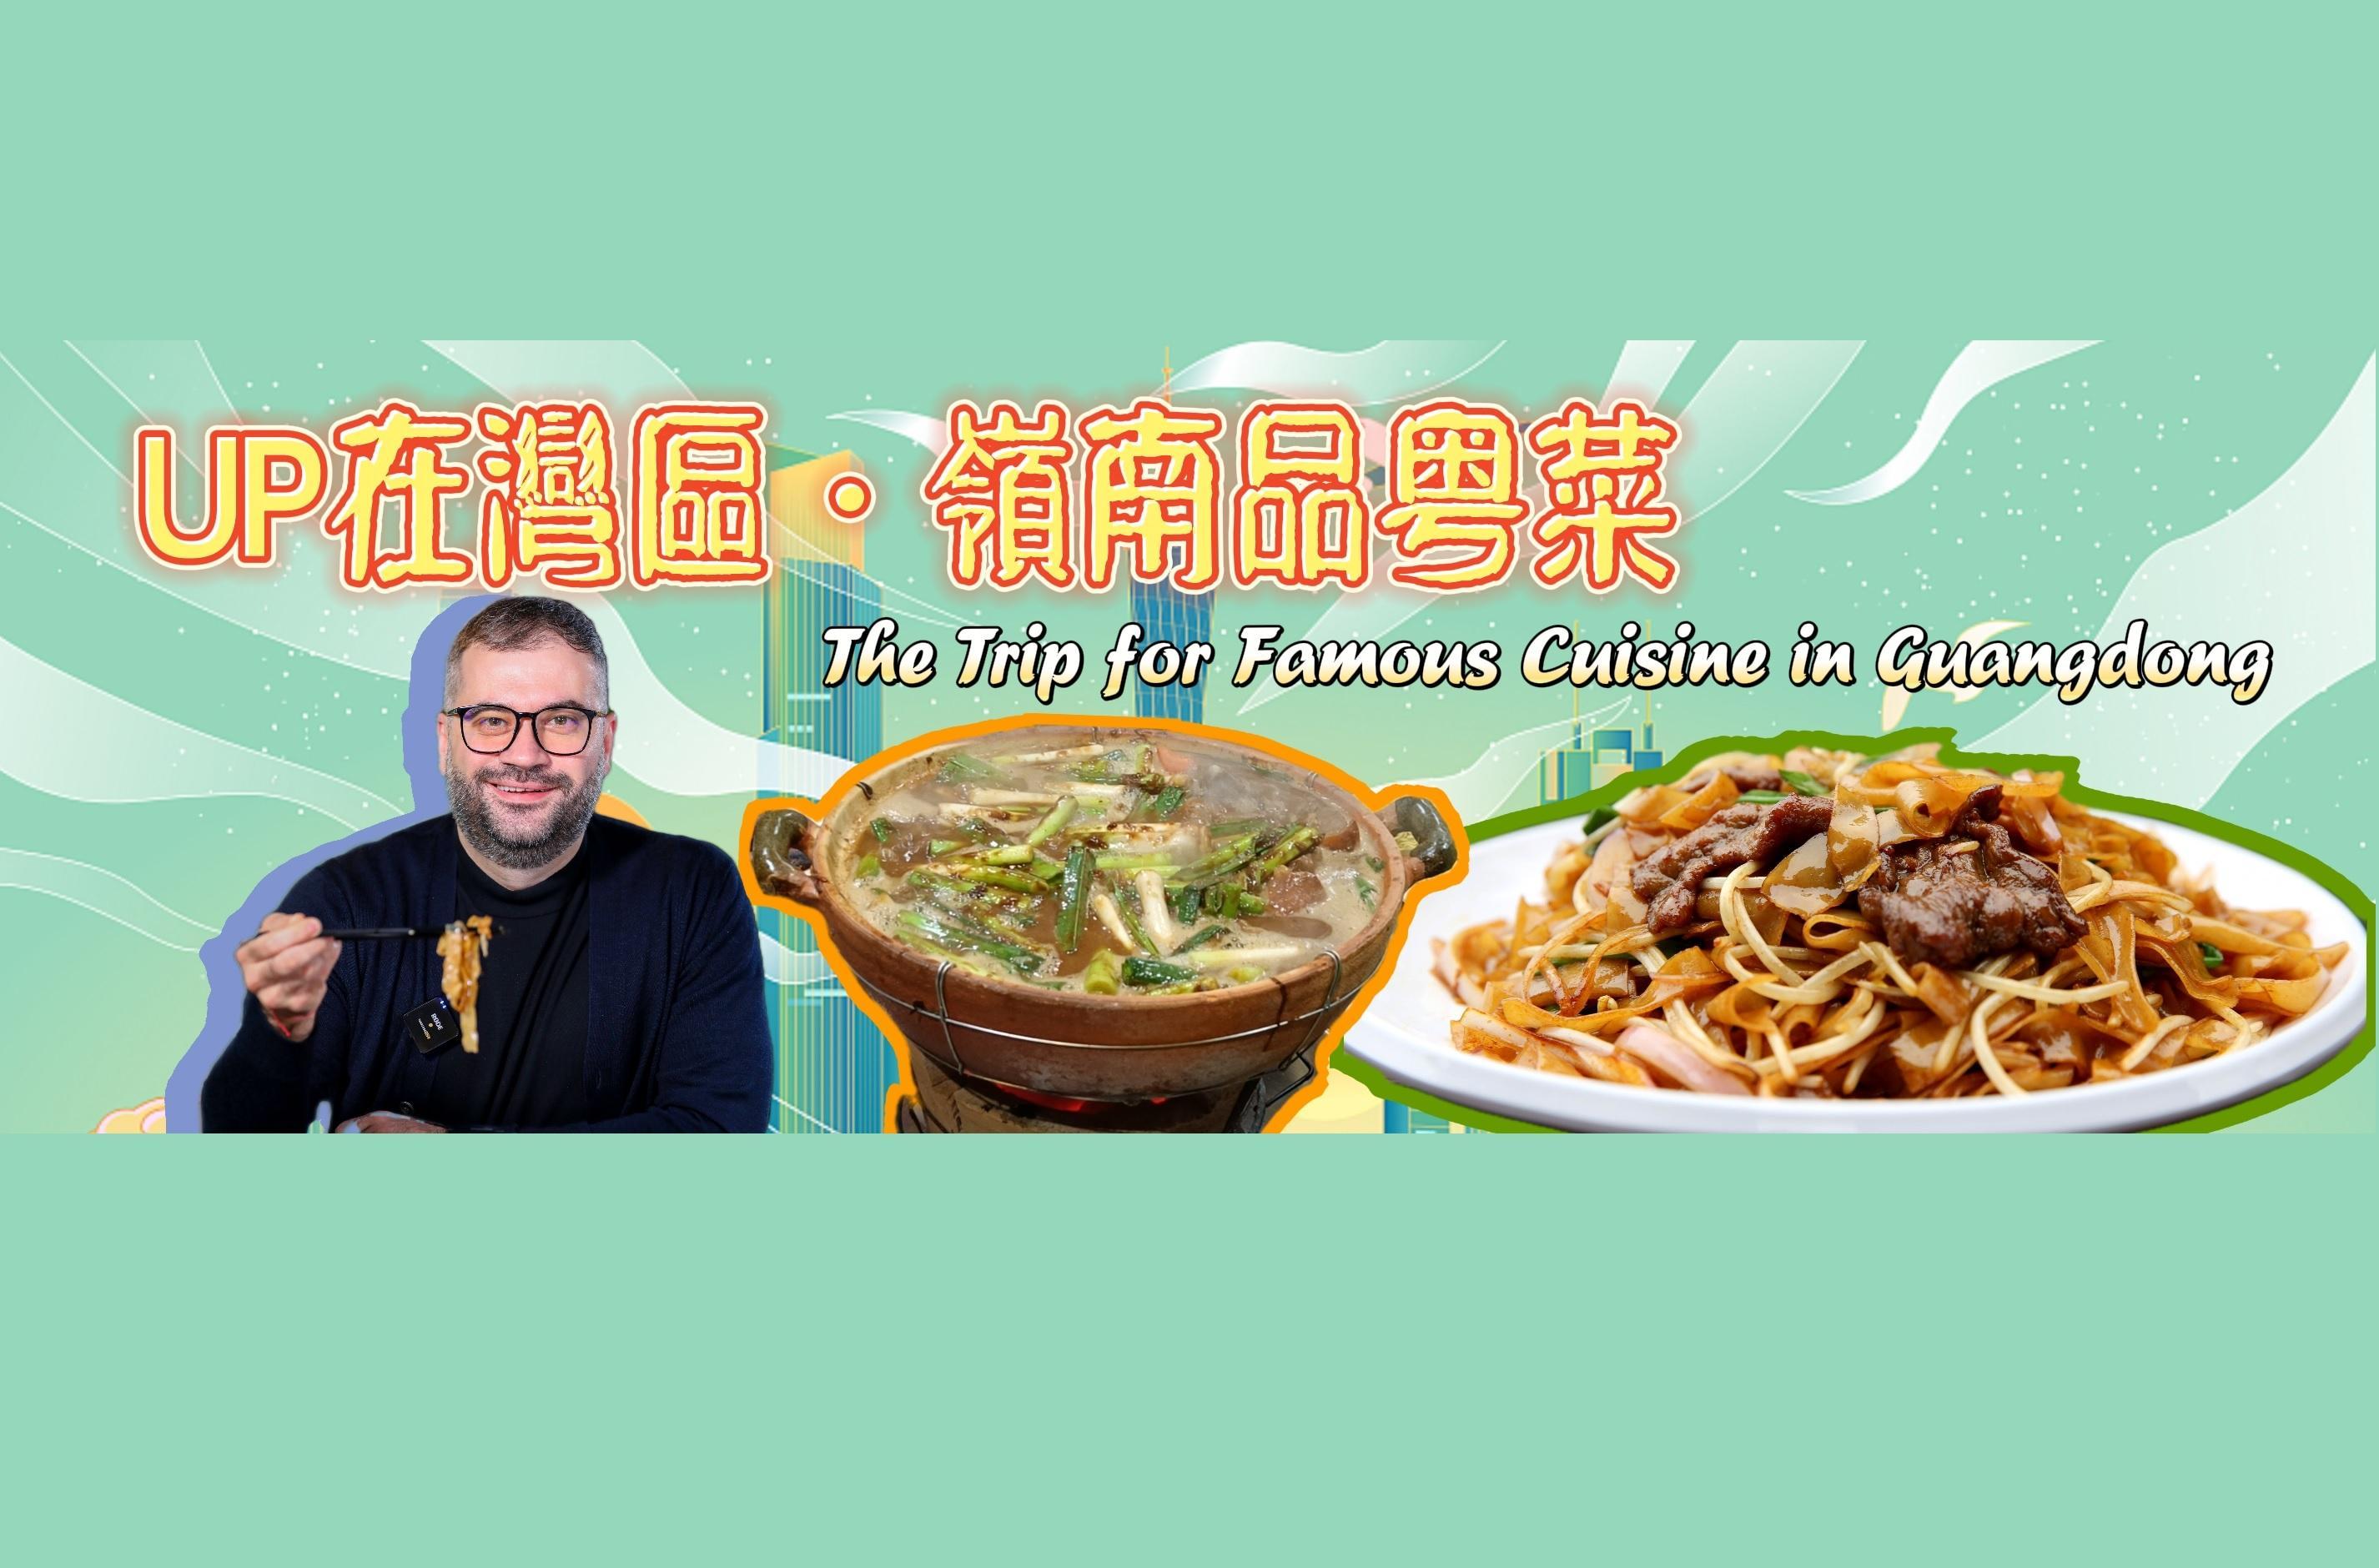 UP在湾区·岭南品粤菜 The Trip for Famous Cantonese Cuisine